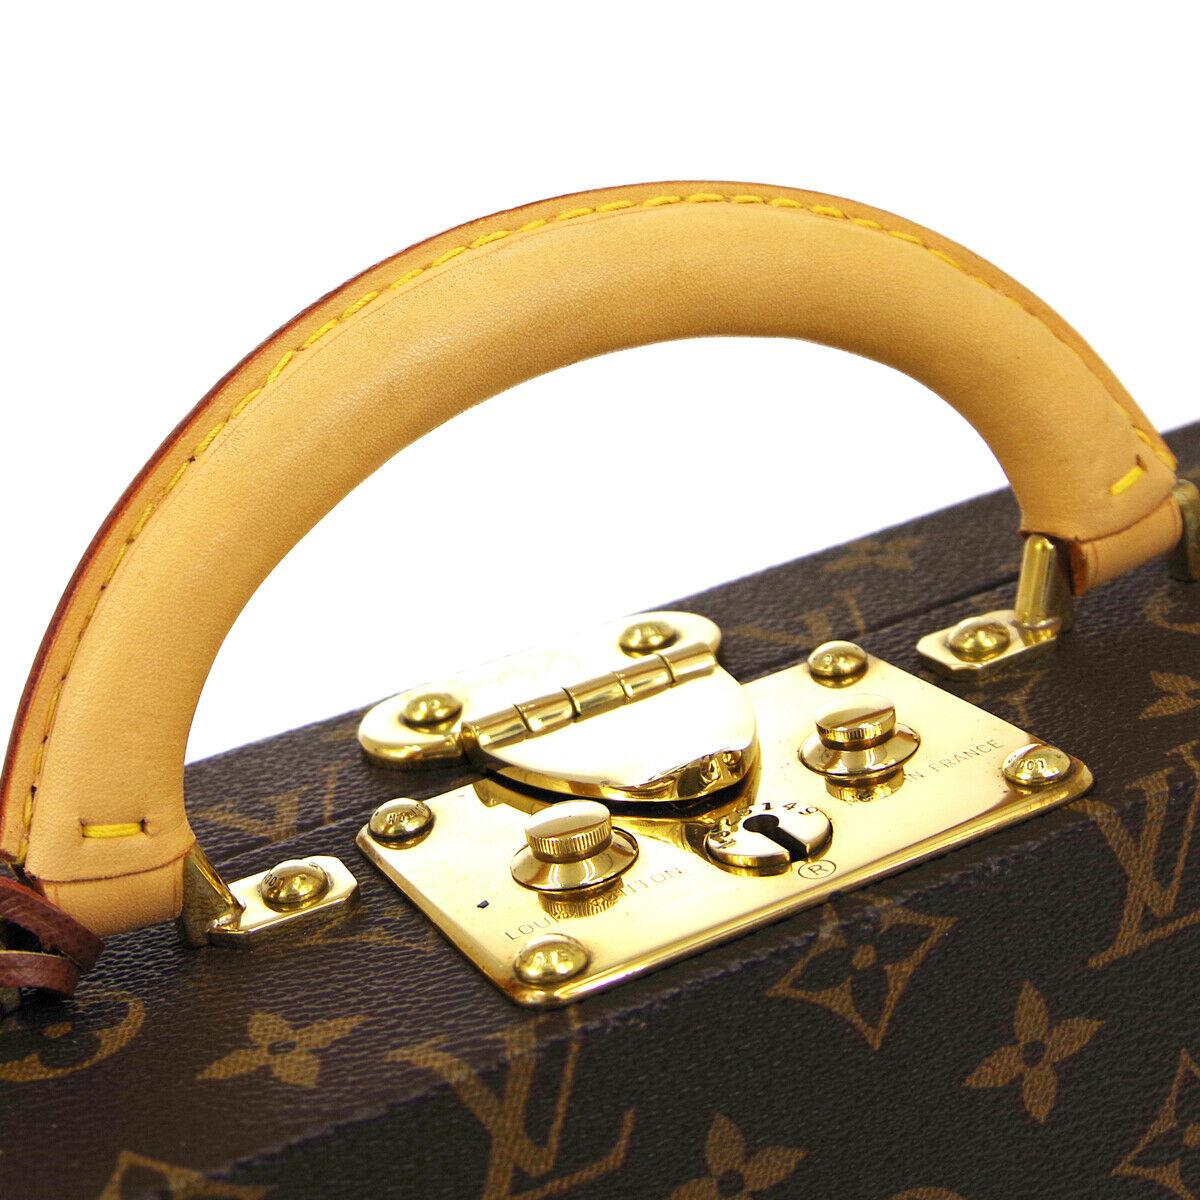 Monogram canvas
Leather
Gold tone hardware
Date code present
Made in France
Handle drop 2